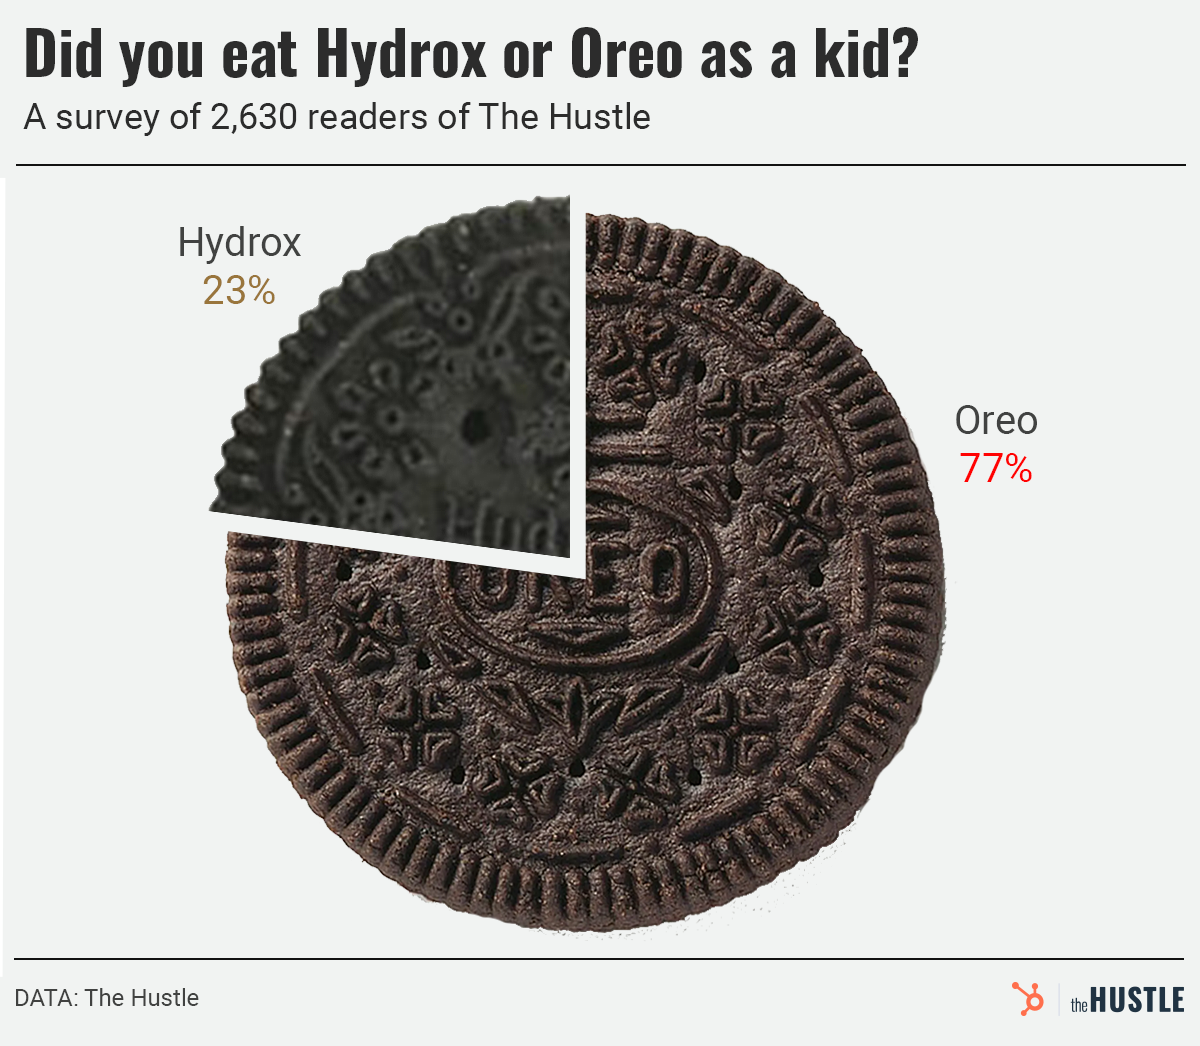 A pie chart depicting a survey that found 23% of Hustle readers ate Hydrox as a child compared to 77% who ate Oreos.